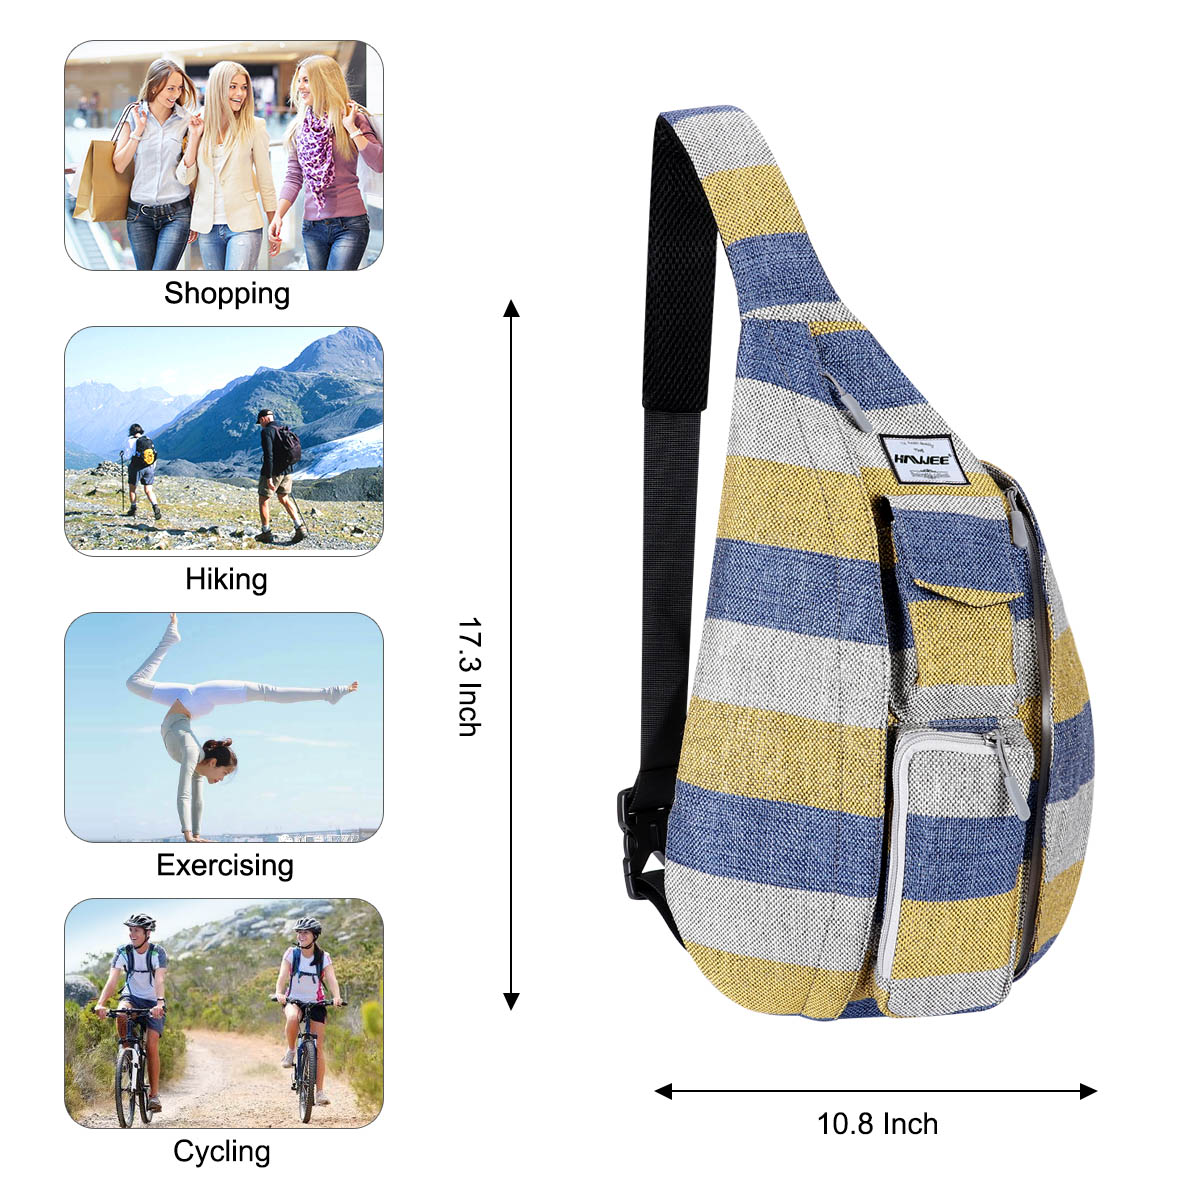 HAWEE Chest Daypack Hiking Backpack Sling Bag Sports Shoulder Travel Crossbody Daypack for Women, Wide Stripes of Yellow/ Blue/Gray - image 5 of 7